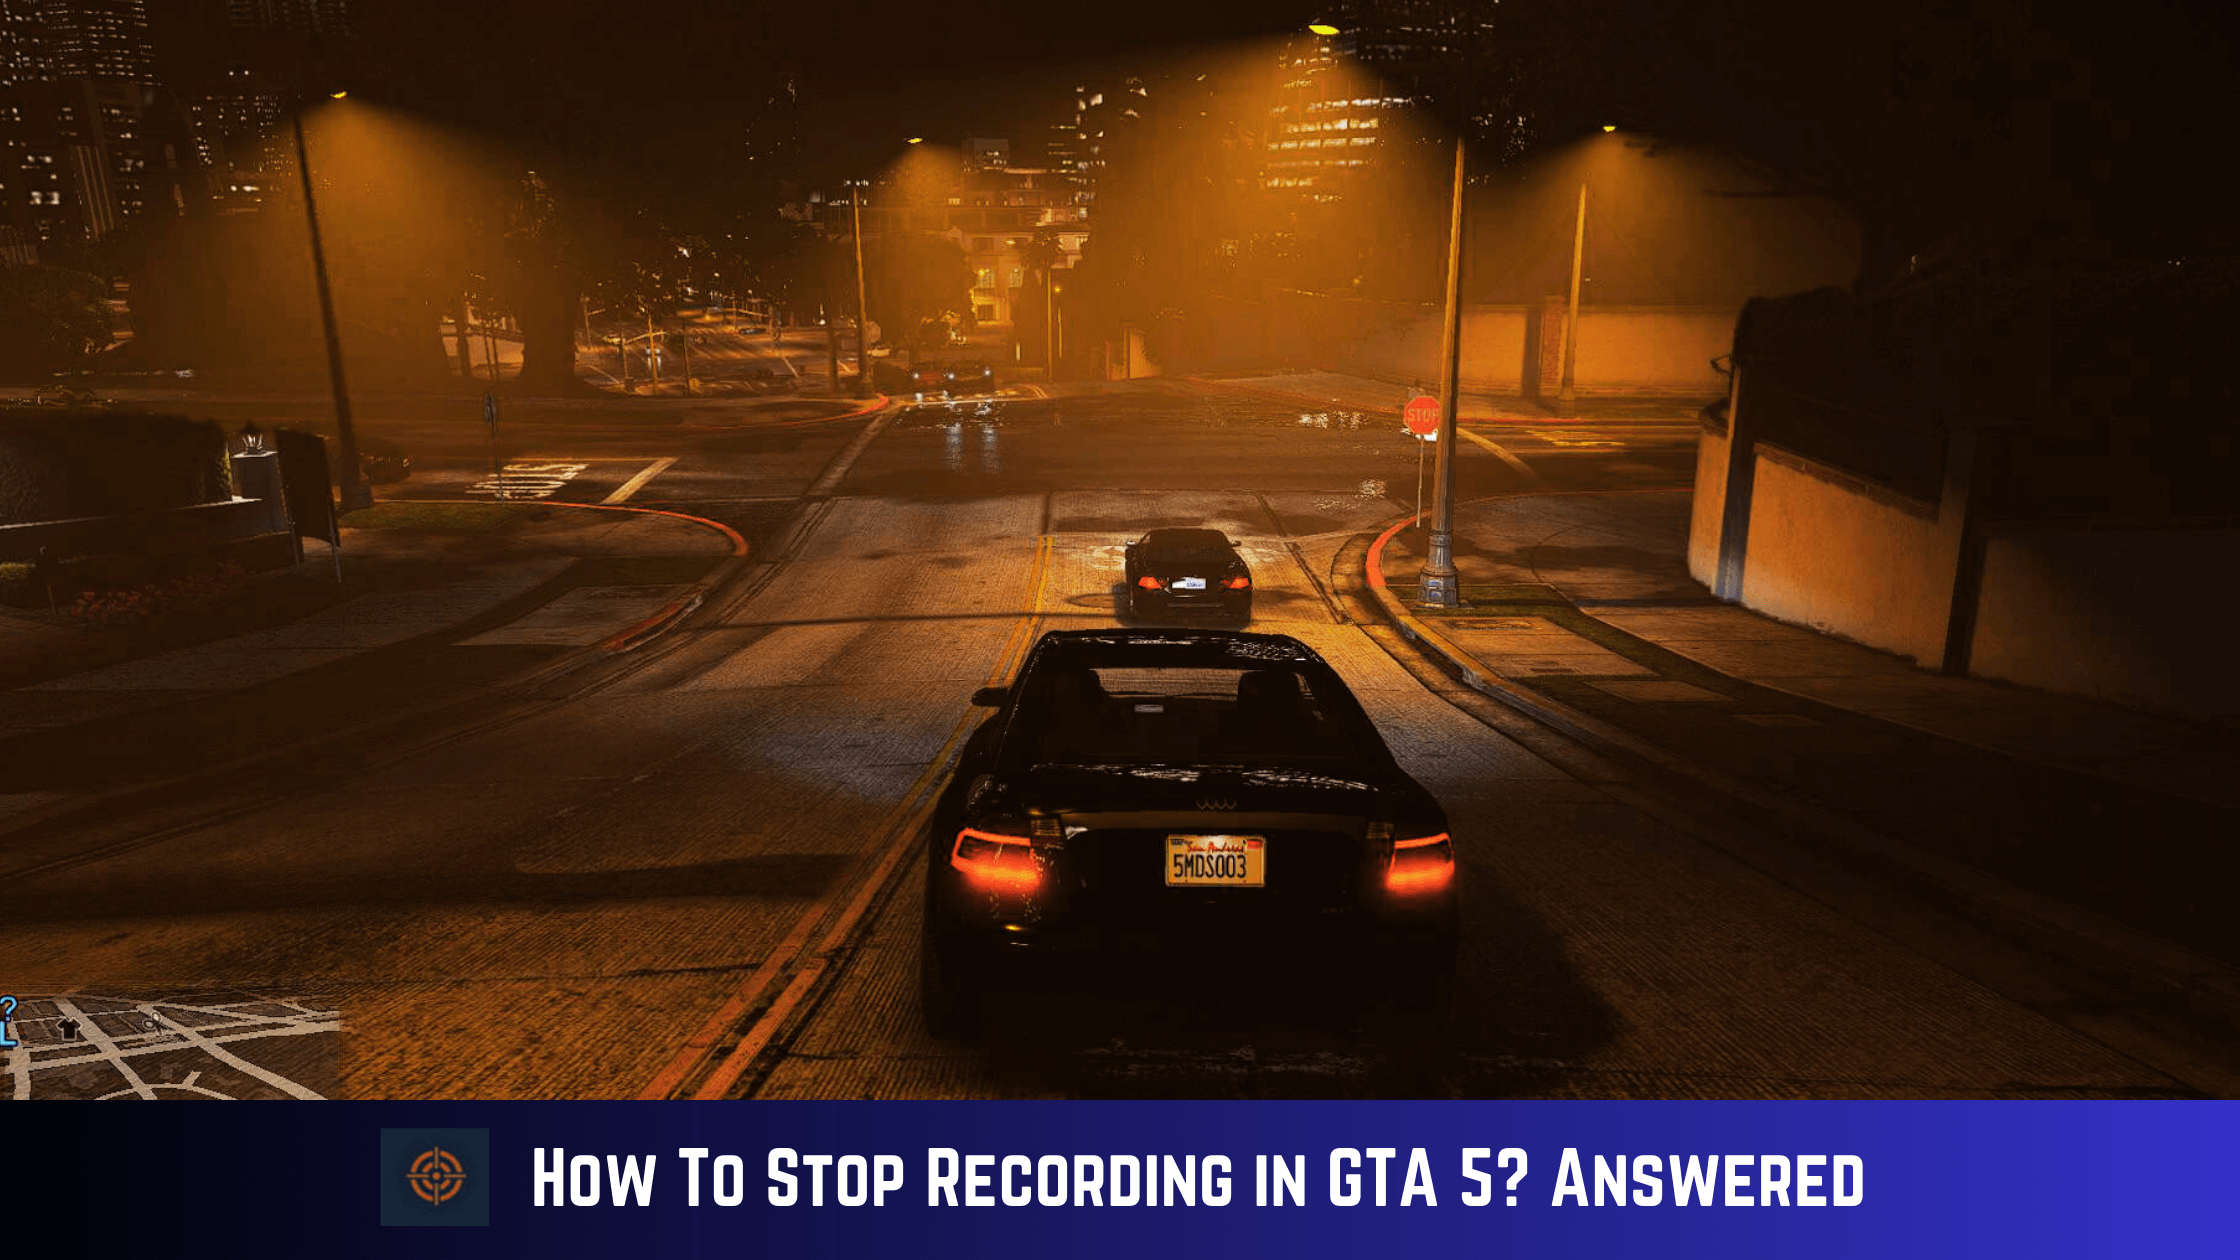 Start and Stop Recording in GTA 5